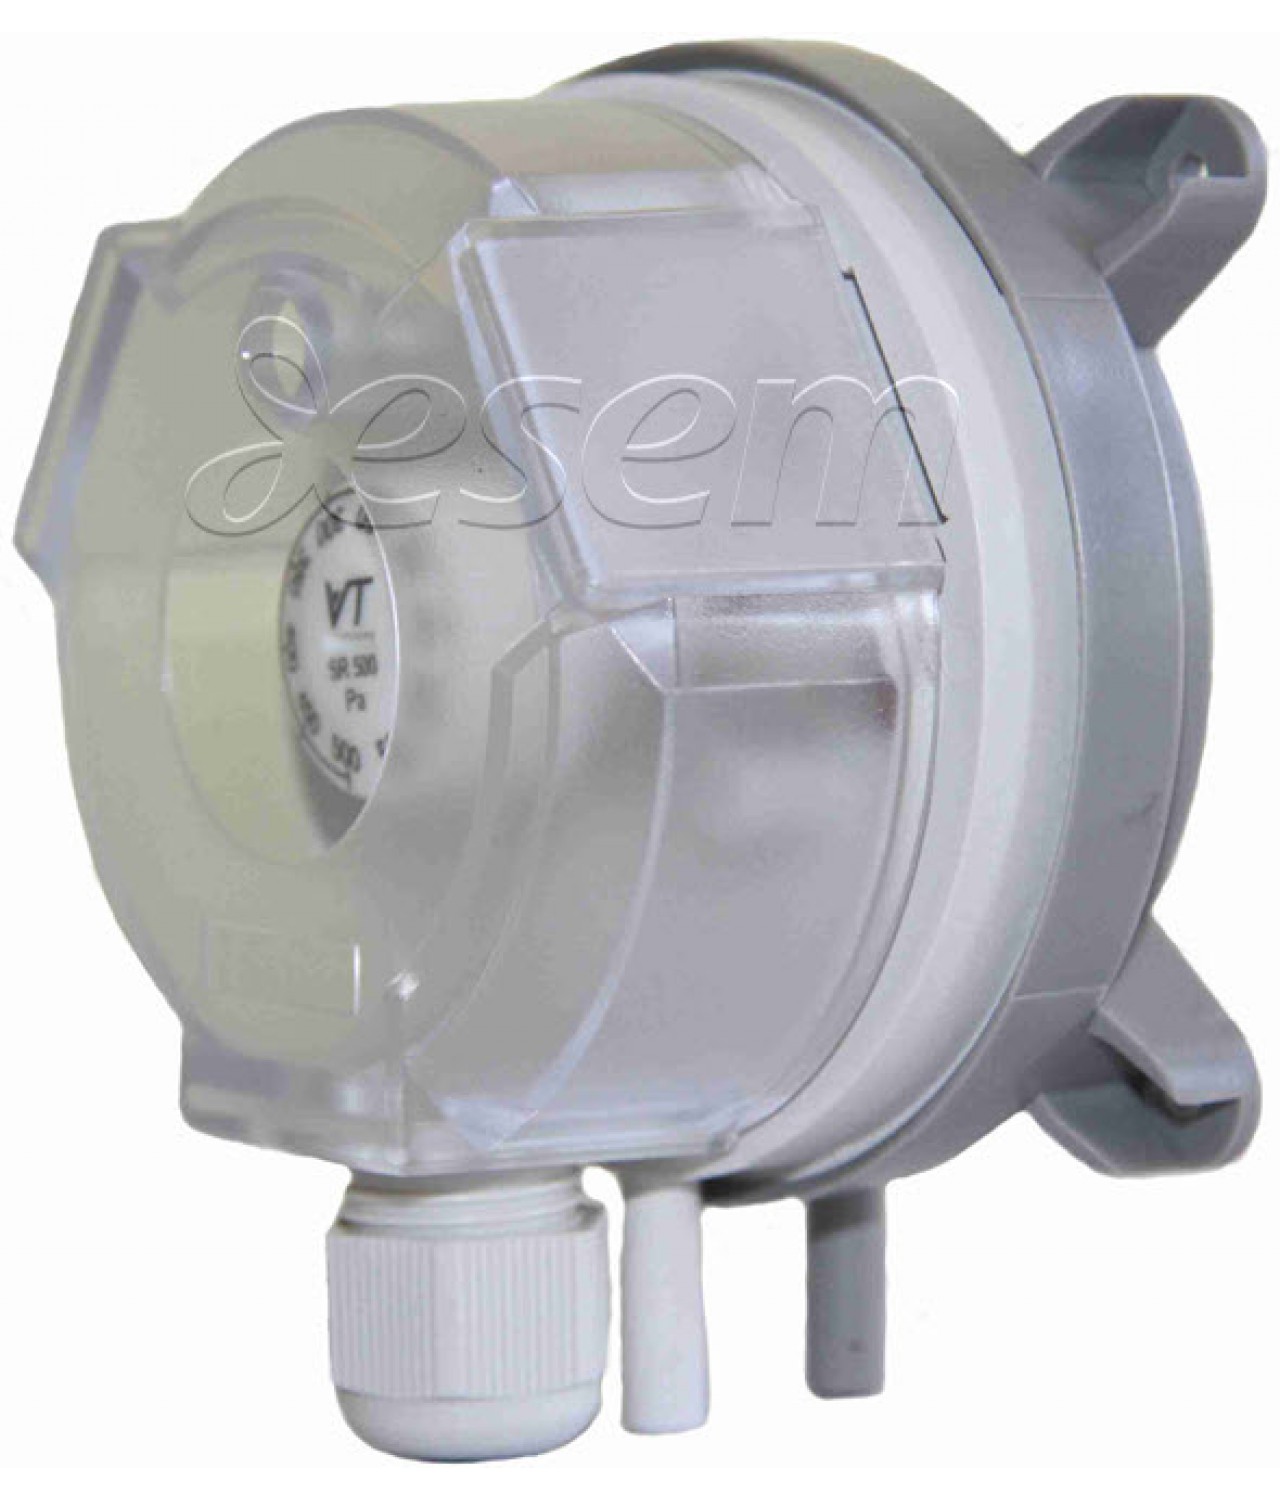 Differential pressure switch DTV500 (500 Pa) with connection set